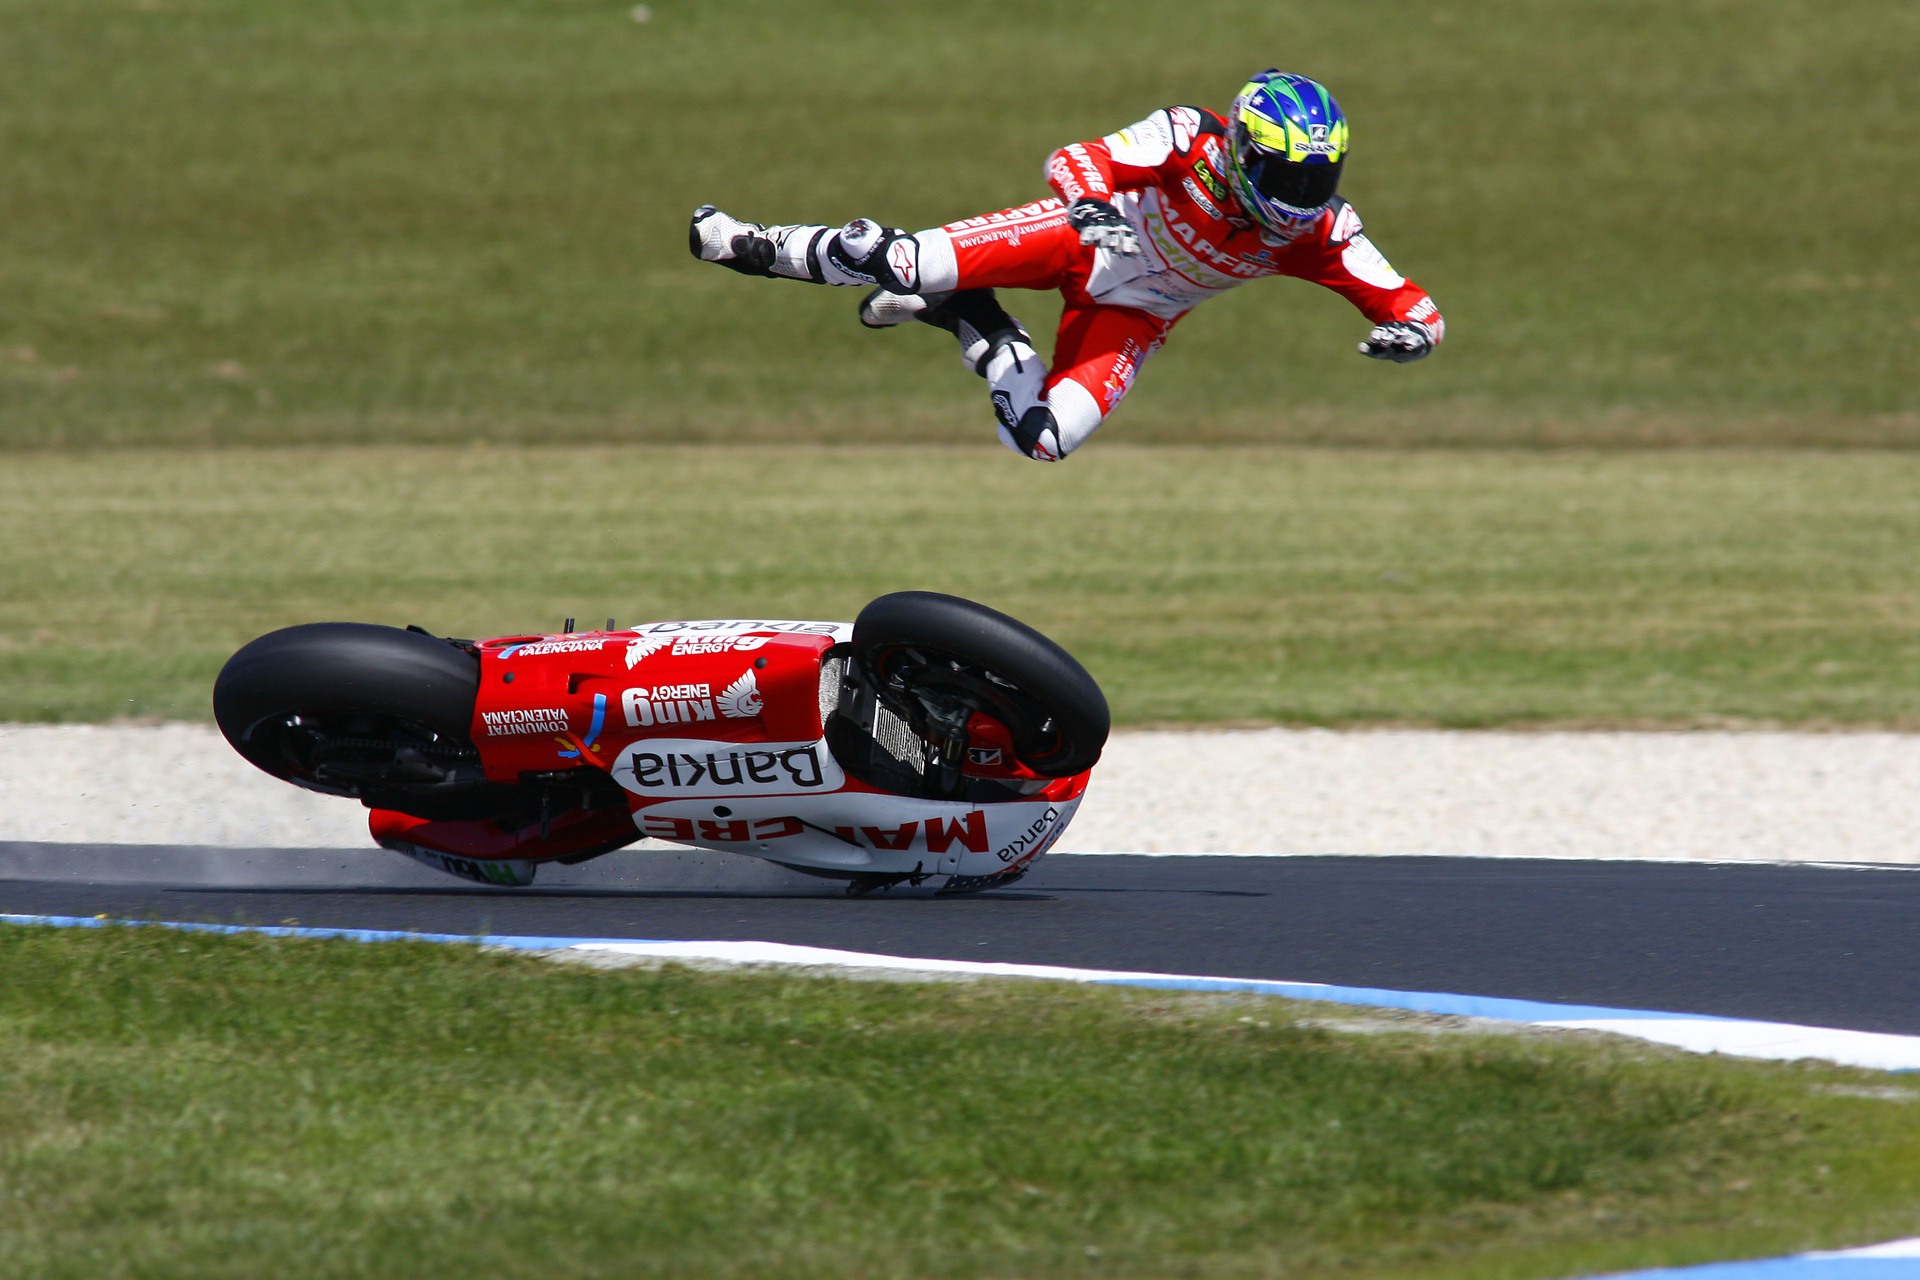 A motorcycle racer suffers a "highside" crash on a racing track